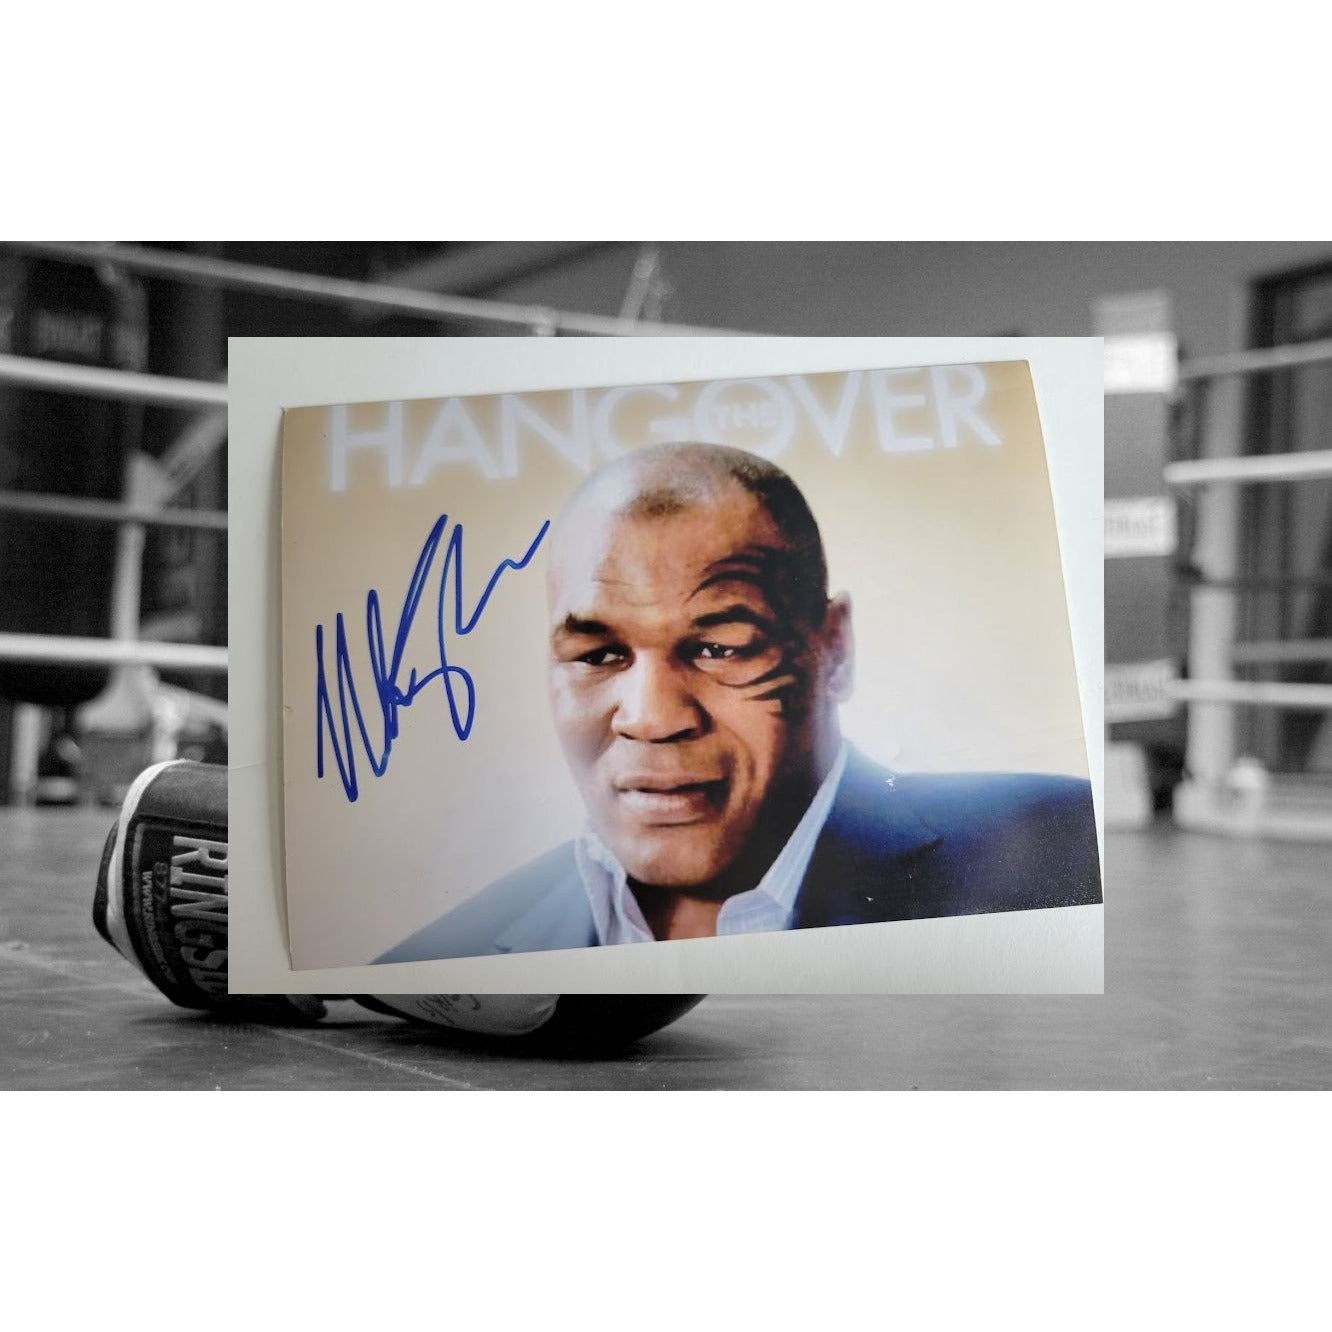 Mike Tyson 5 x 7 photograph signed